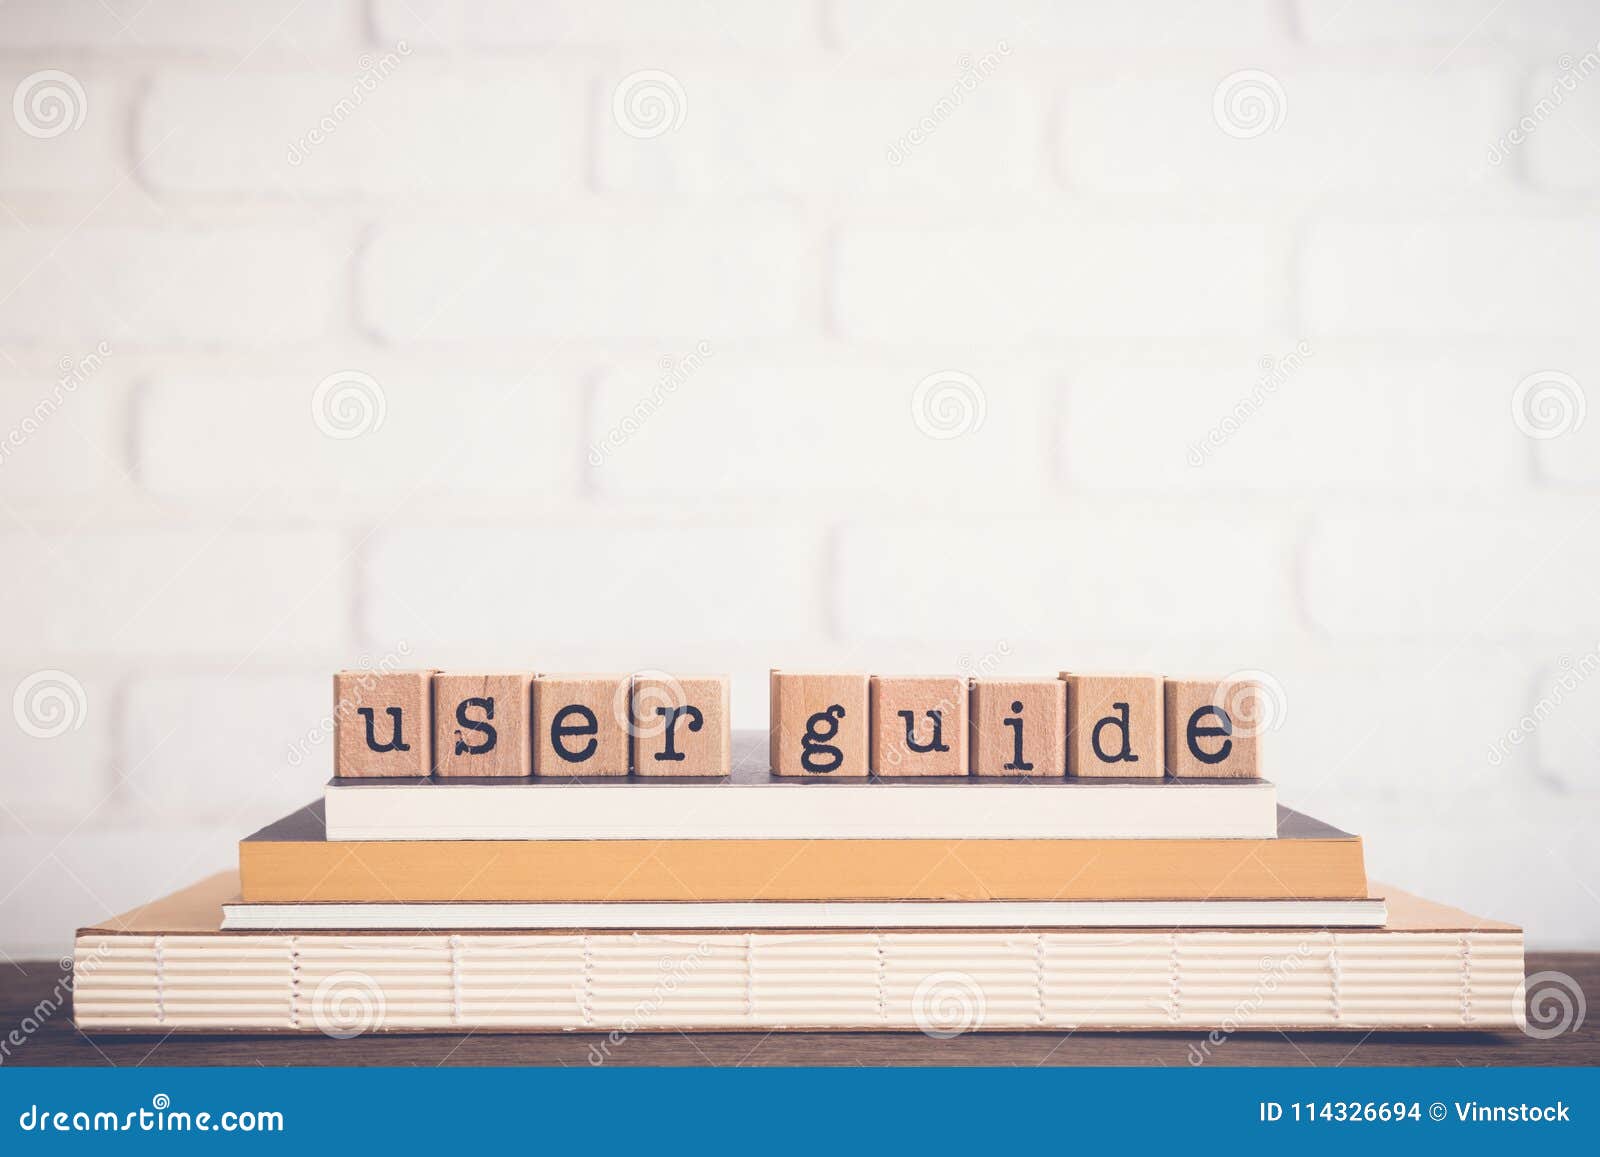 the word user guide and copy space background.